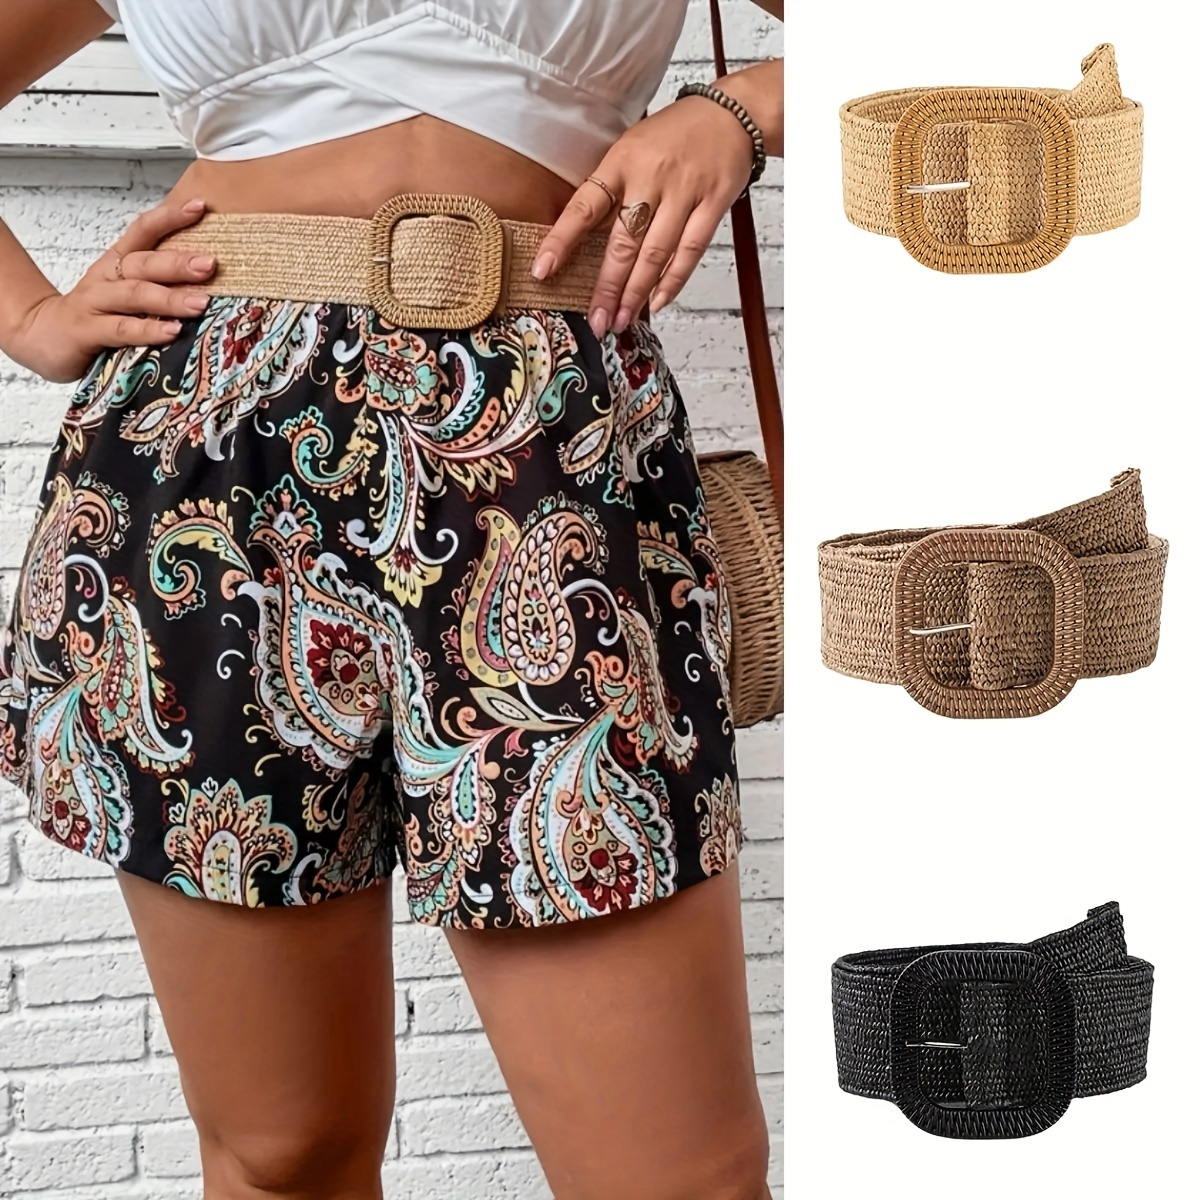 

Classic Square Buckle Boho Belts Solid Color Braided Straw Belt Elastic Waistband Simple Jeans Belt Dress Girdle For Women